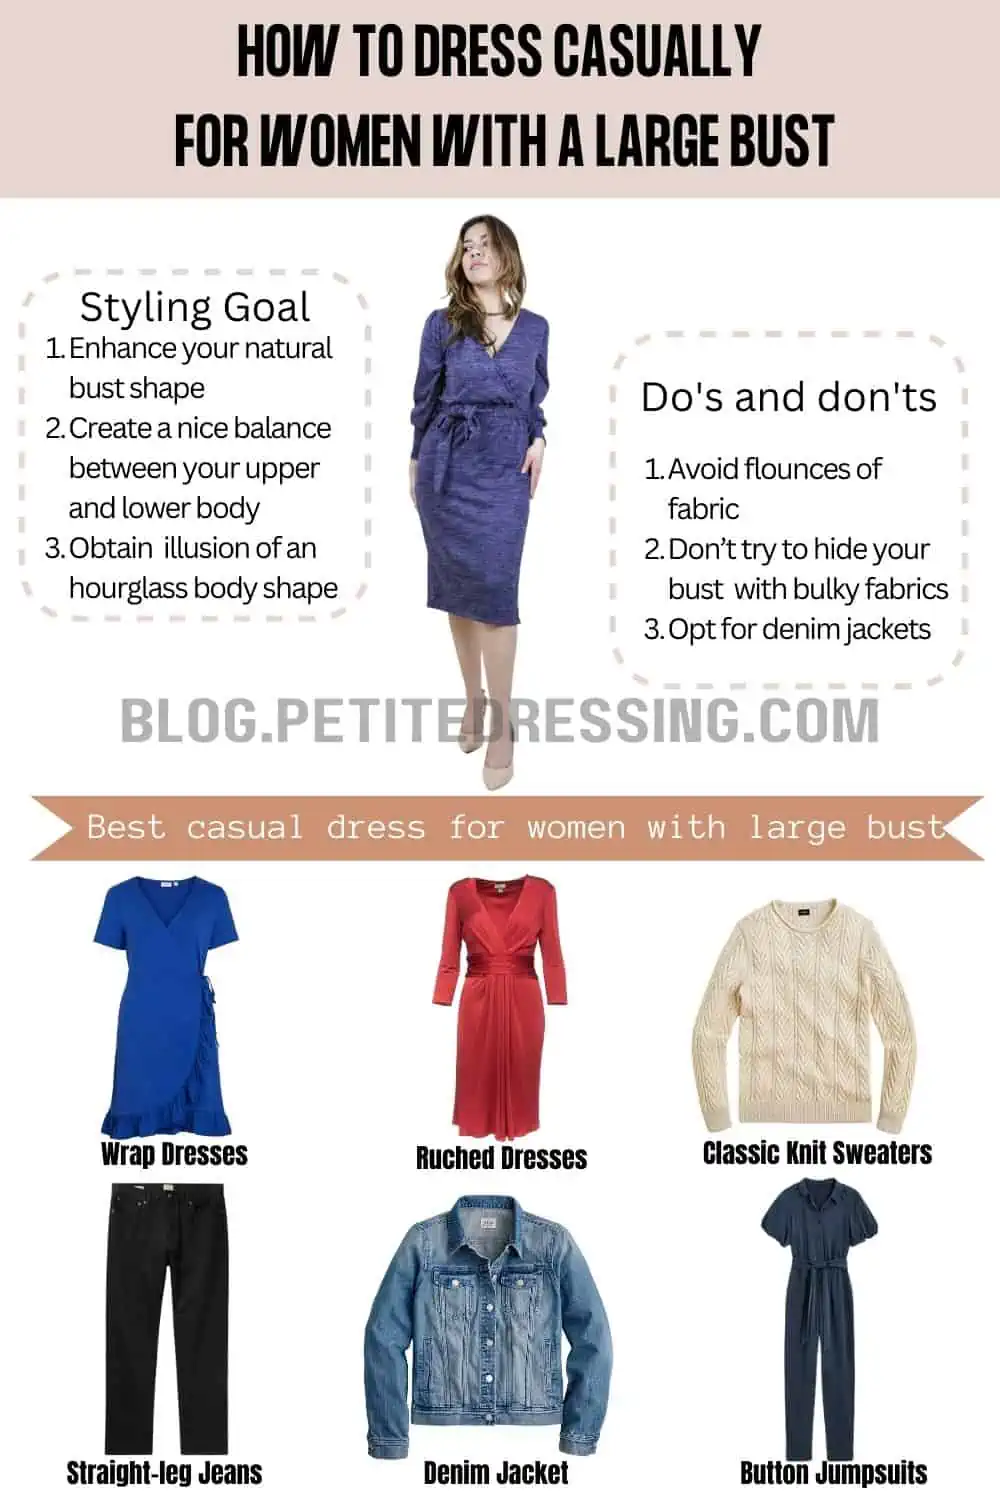 How to Dress Casually for Women with a Large Bust - Petite Dressing